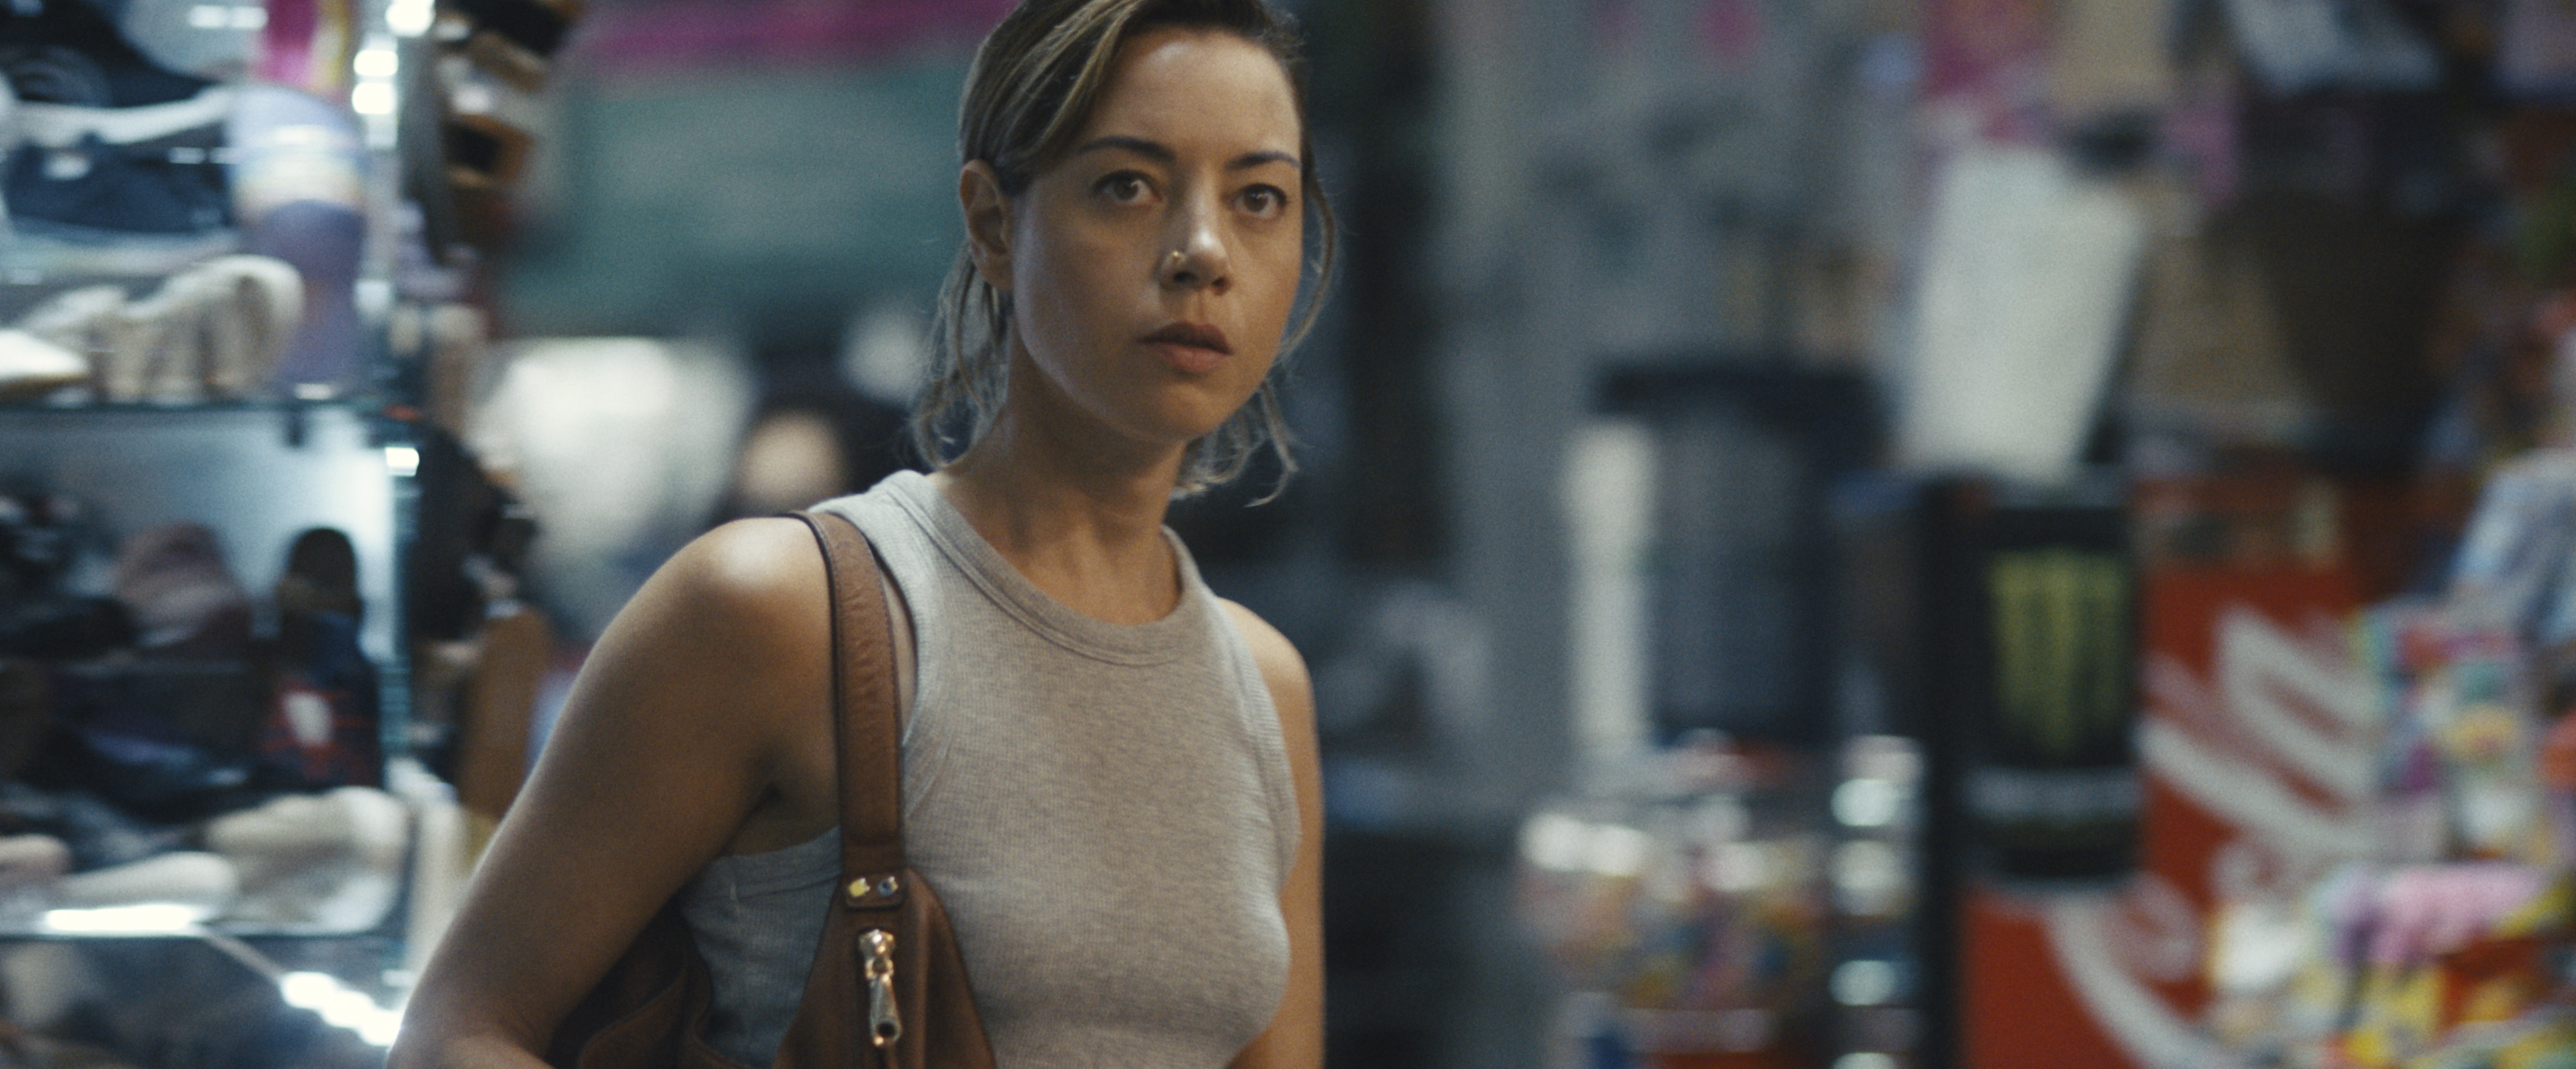 Aubrey Plaza teases major career move that follows in footsteps of Pretty  Woman director